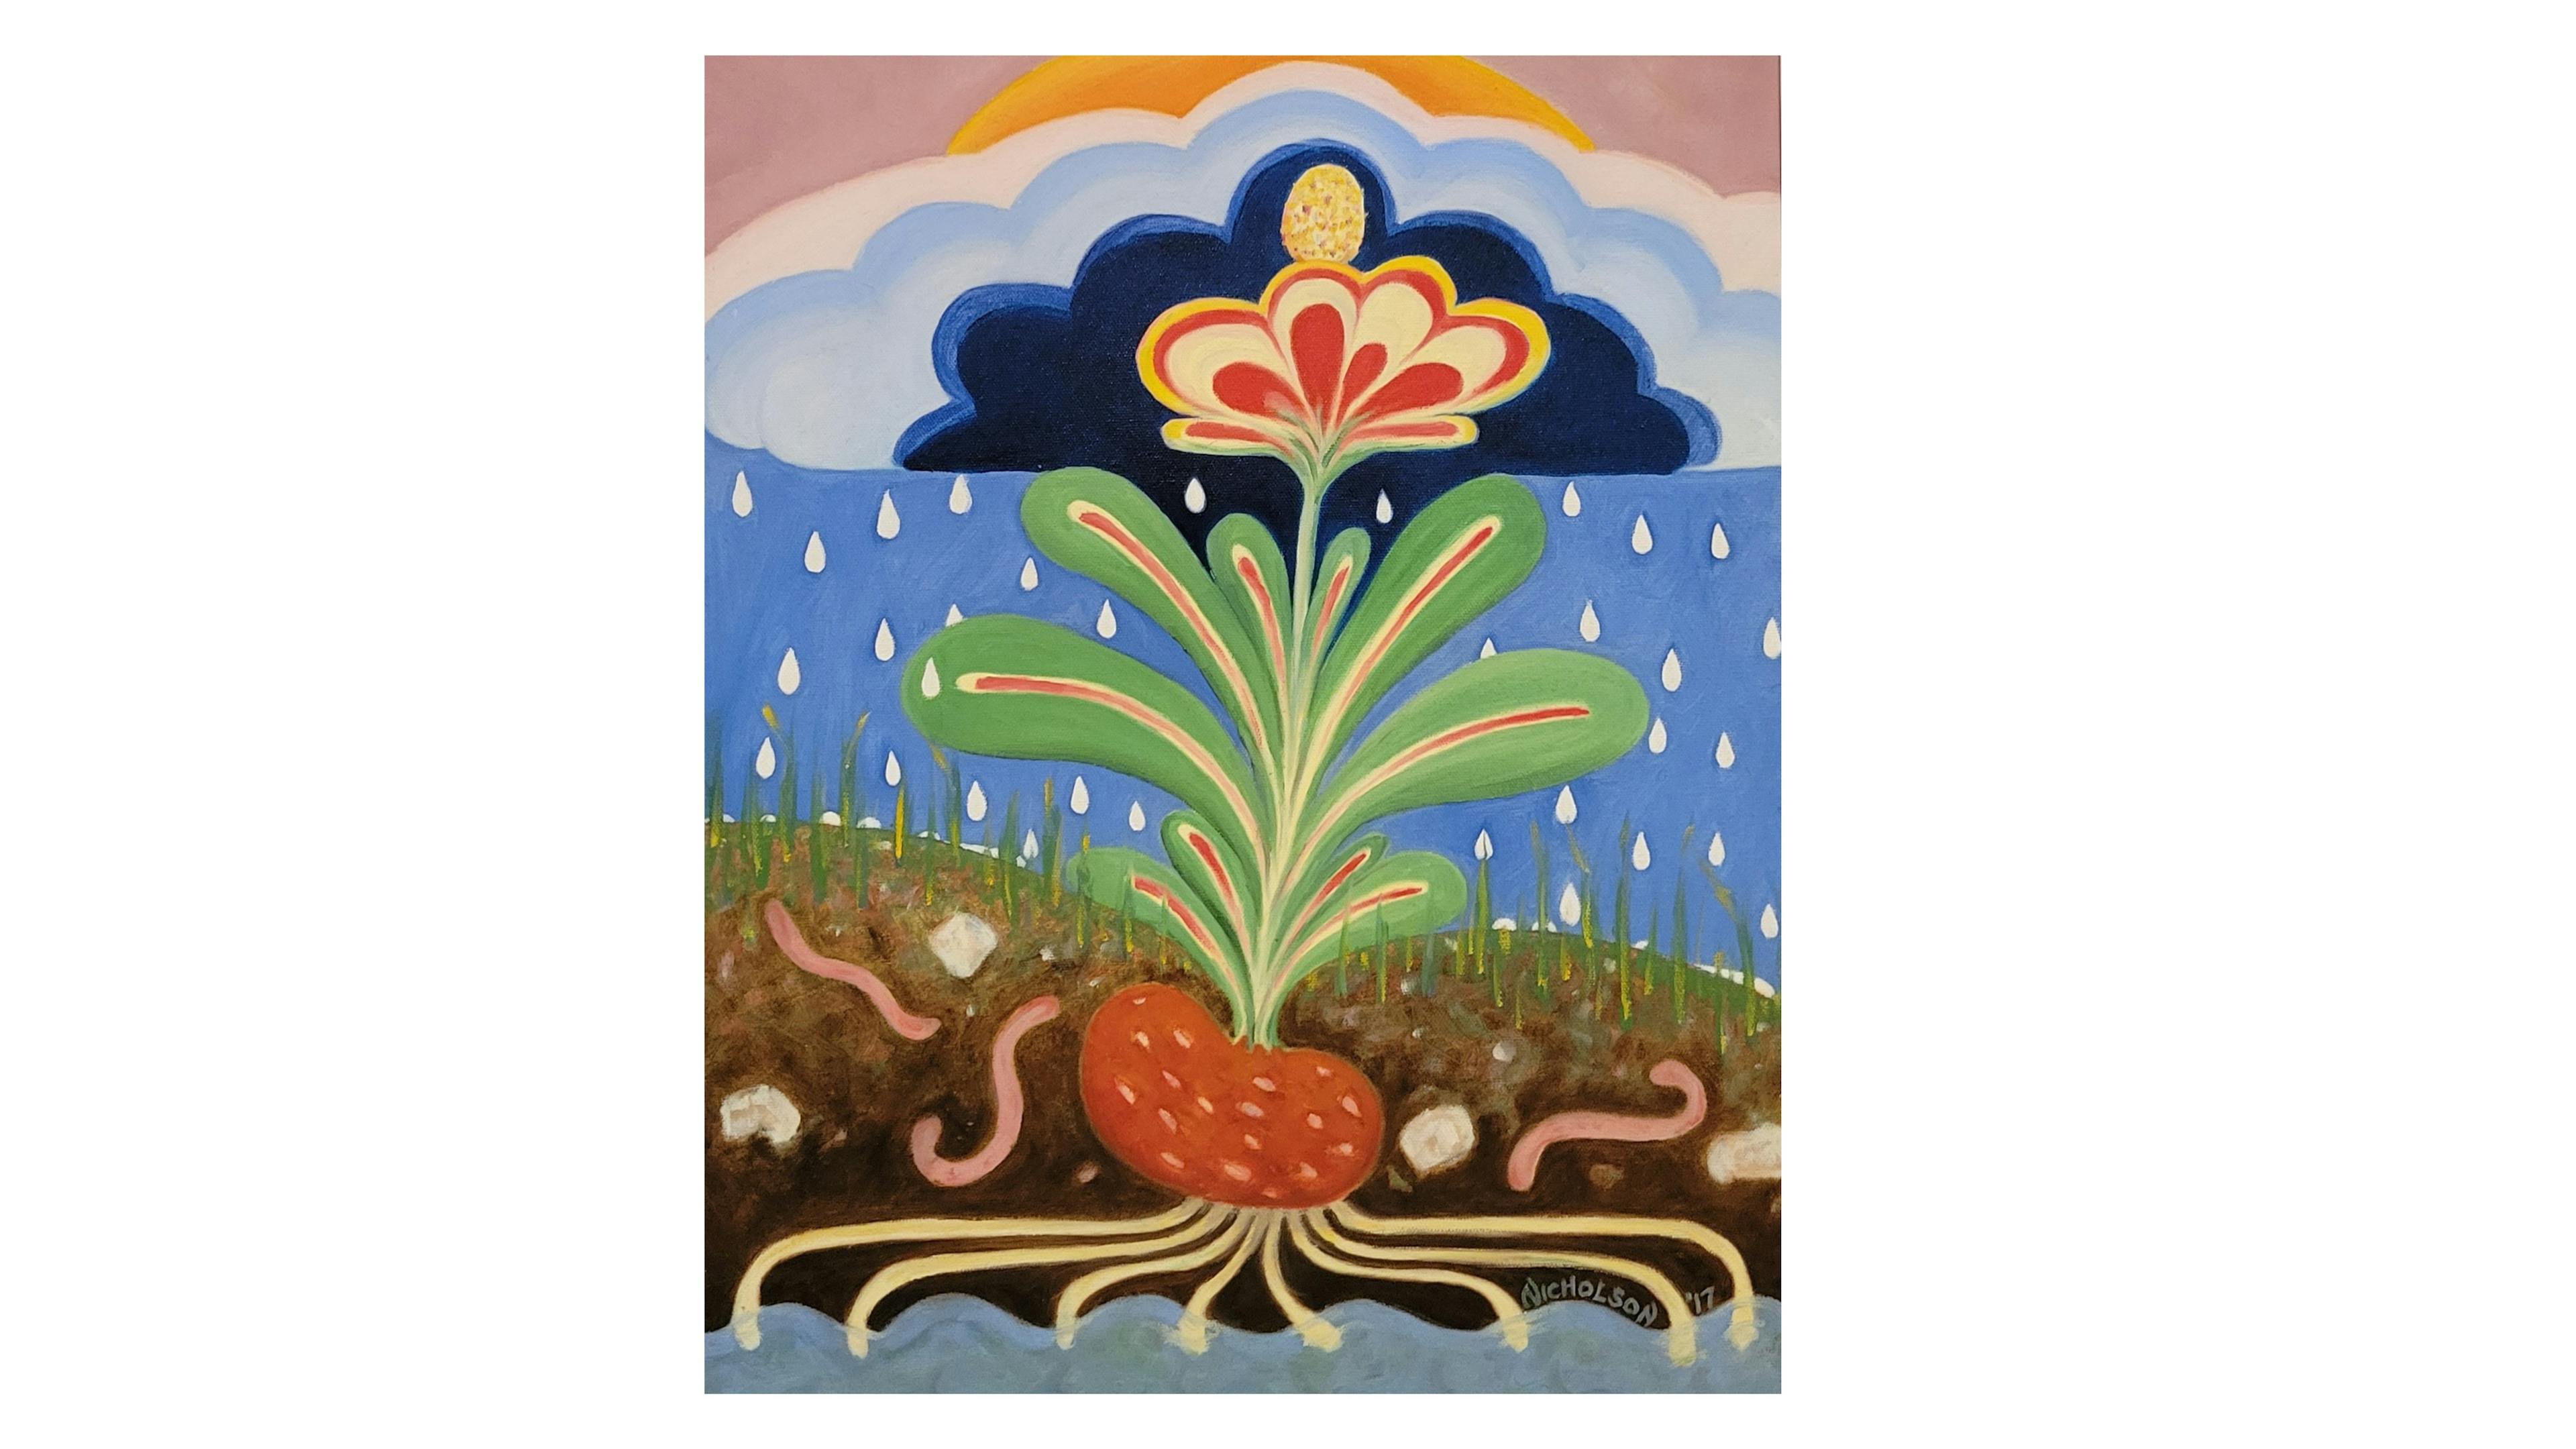 Depicts a vibrant scene with a head in the sky, roots in soil and water, falling rain, and a cloud-haloed bloom. Elements like grass, stones, and pink worms are nestled in the soil, using primarily primary colors with minimal mixing technique.